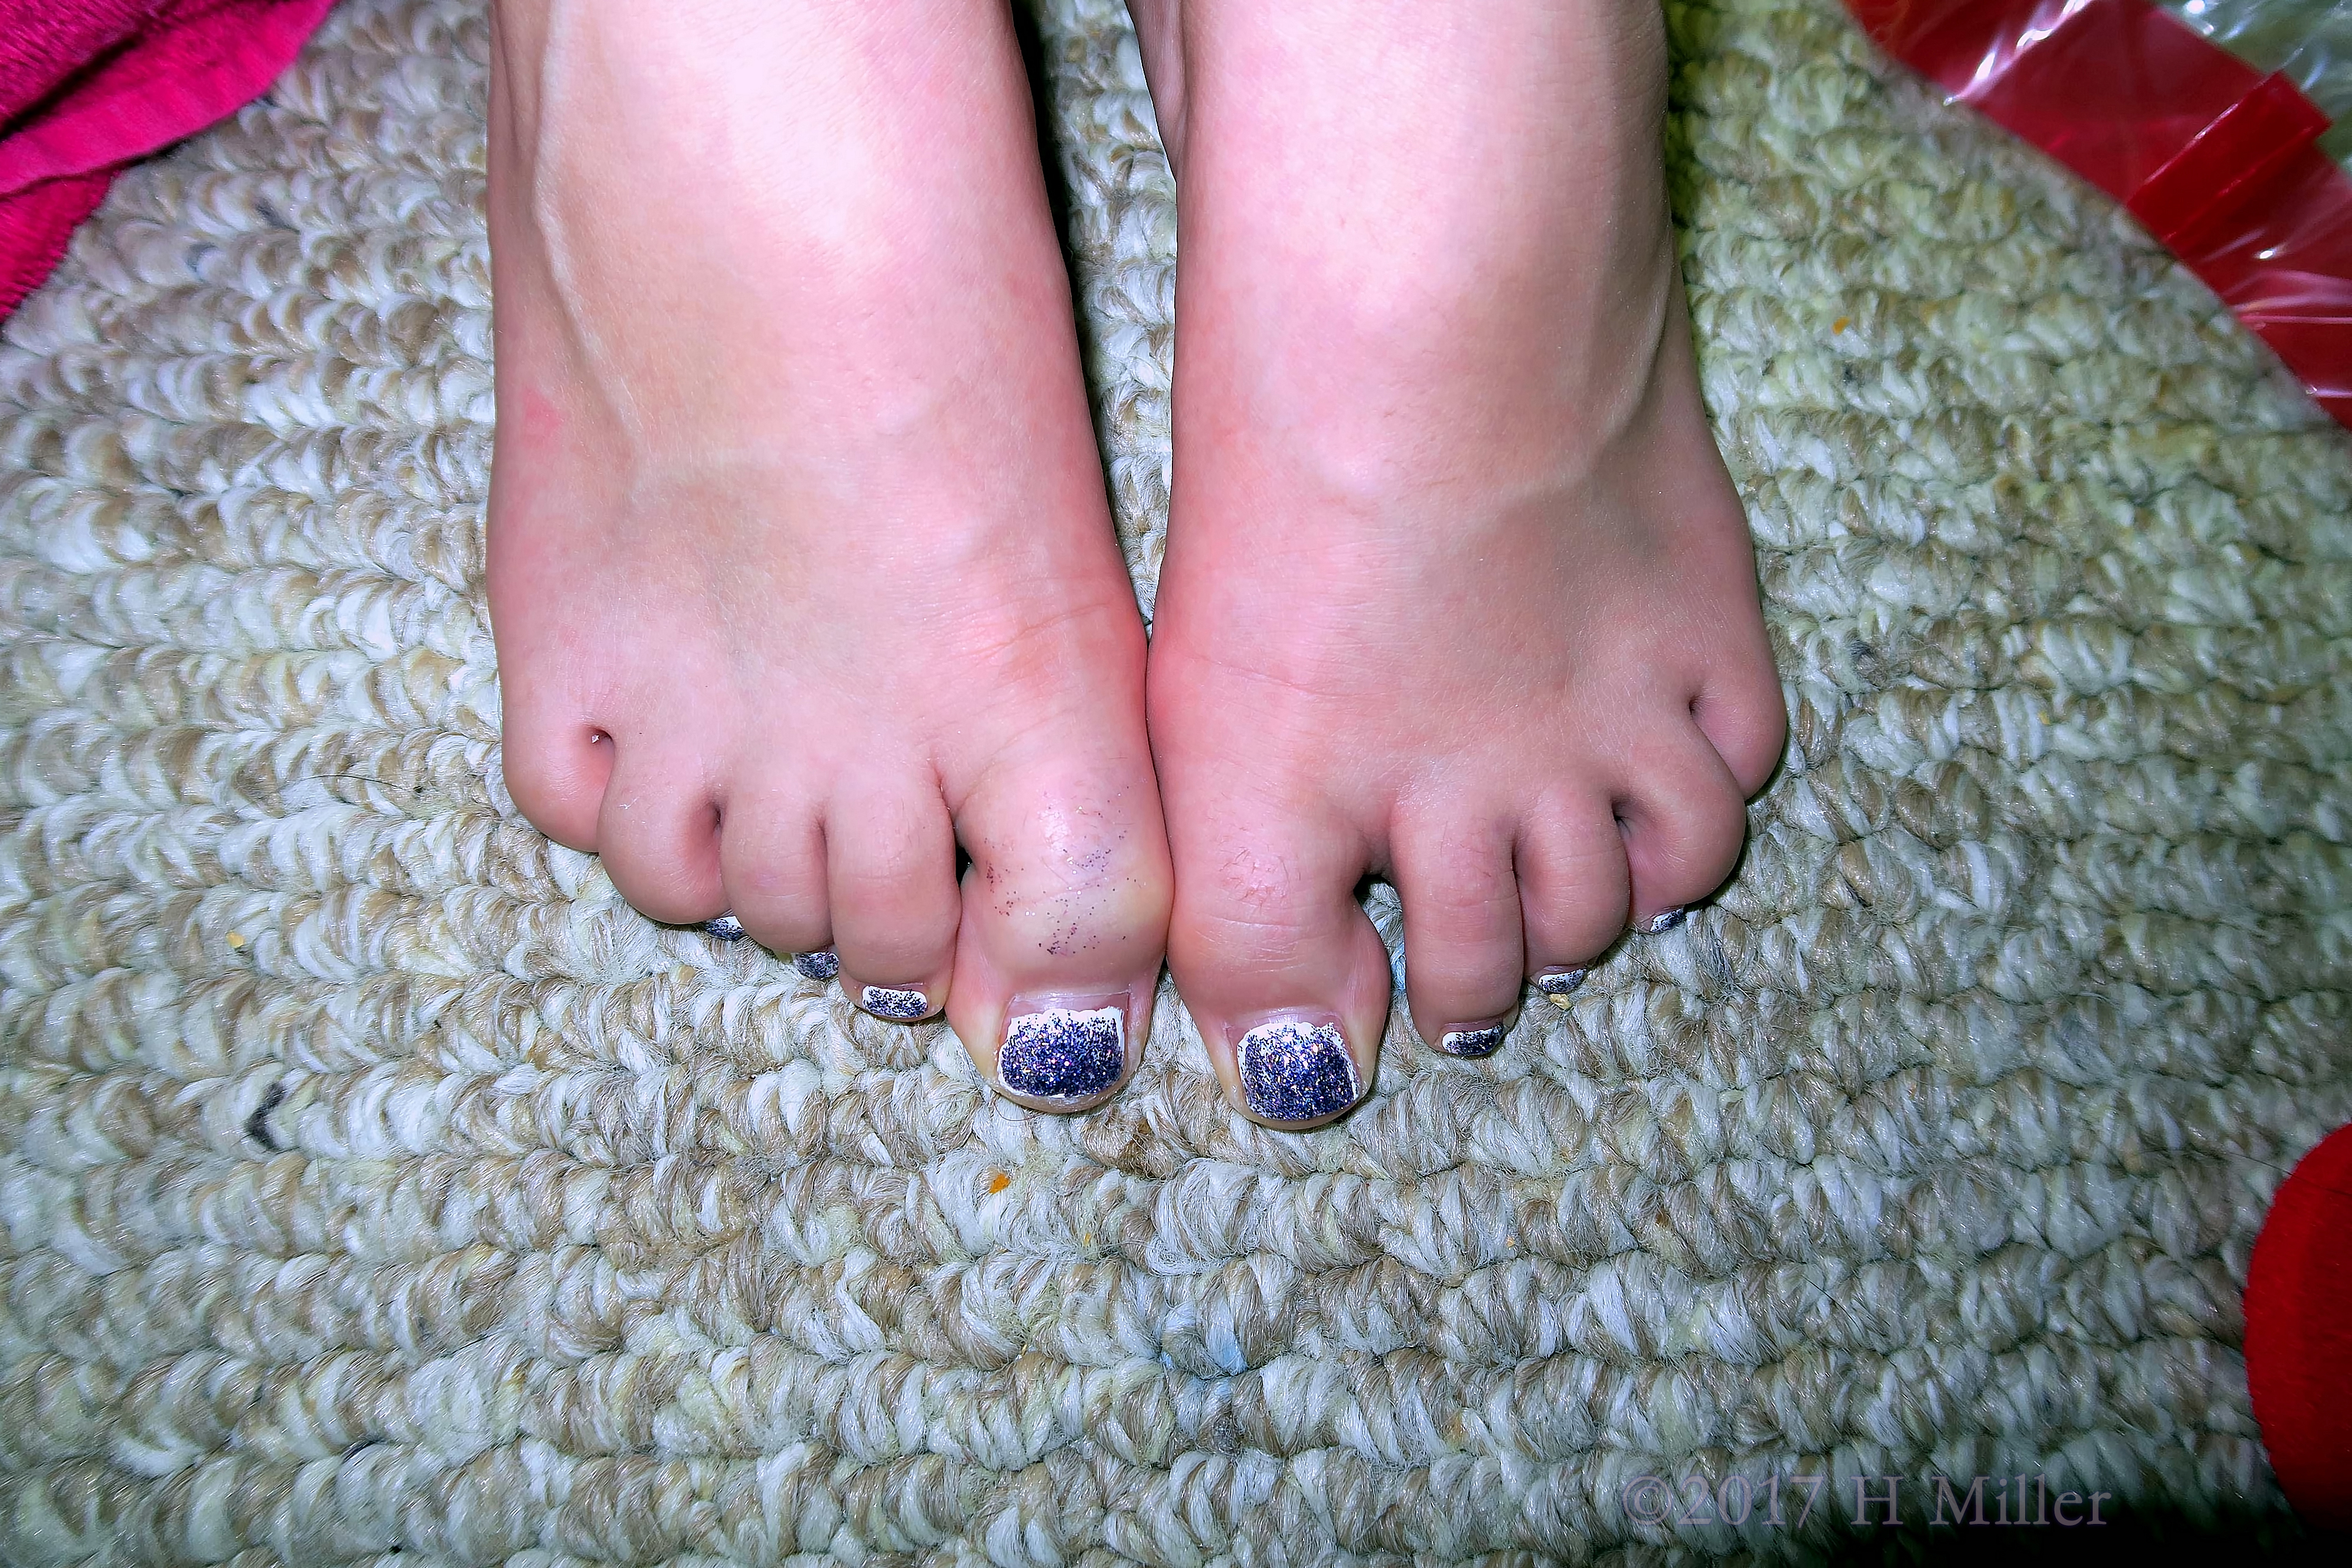 Kids Pedicure For The Birthday Girl With Purple Glitter And White Polish. 4